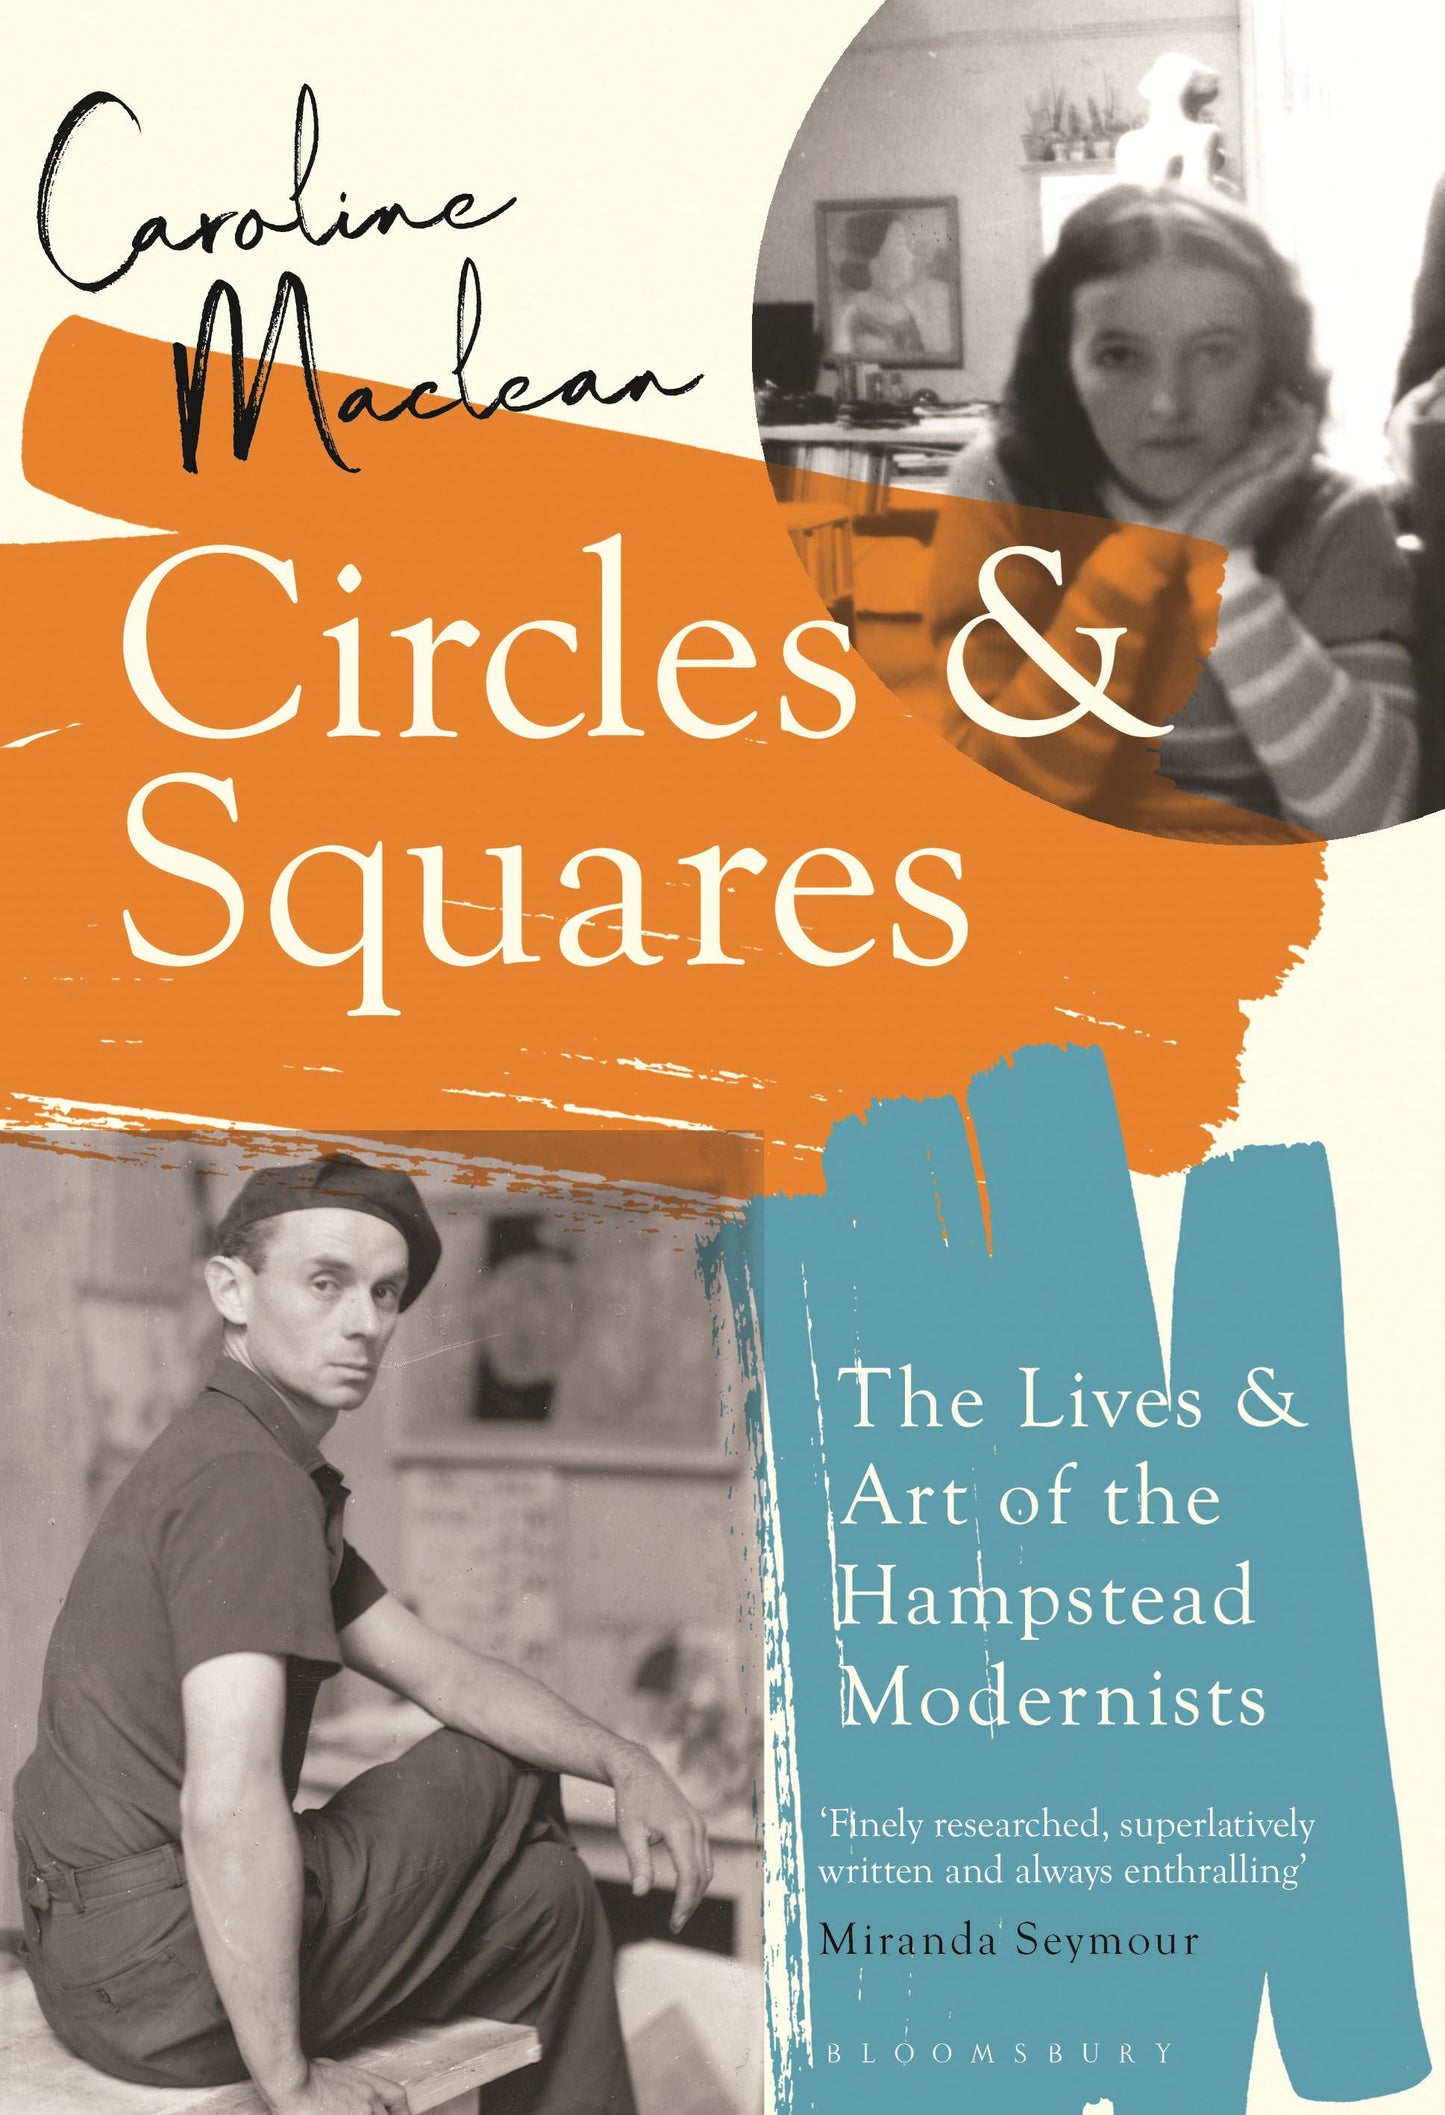 Circles and Squares: The Hampstead Modernists